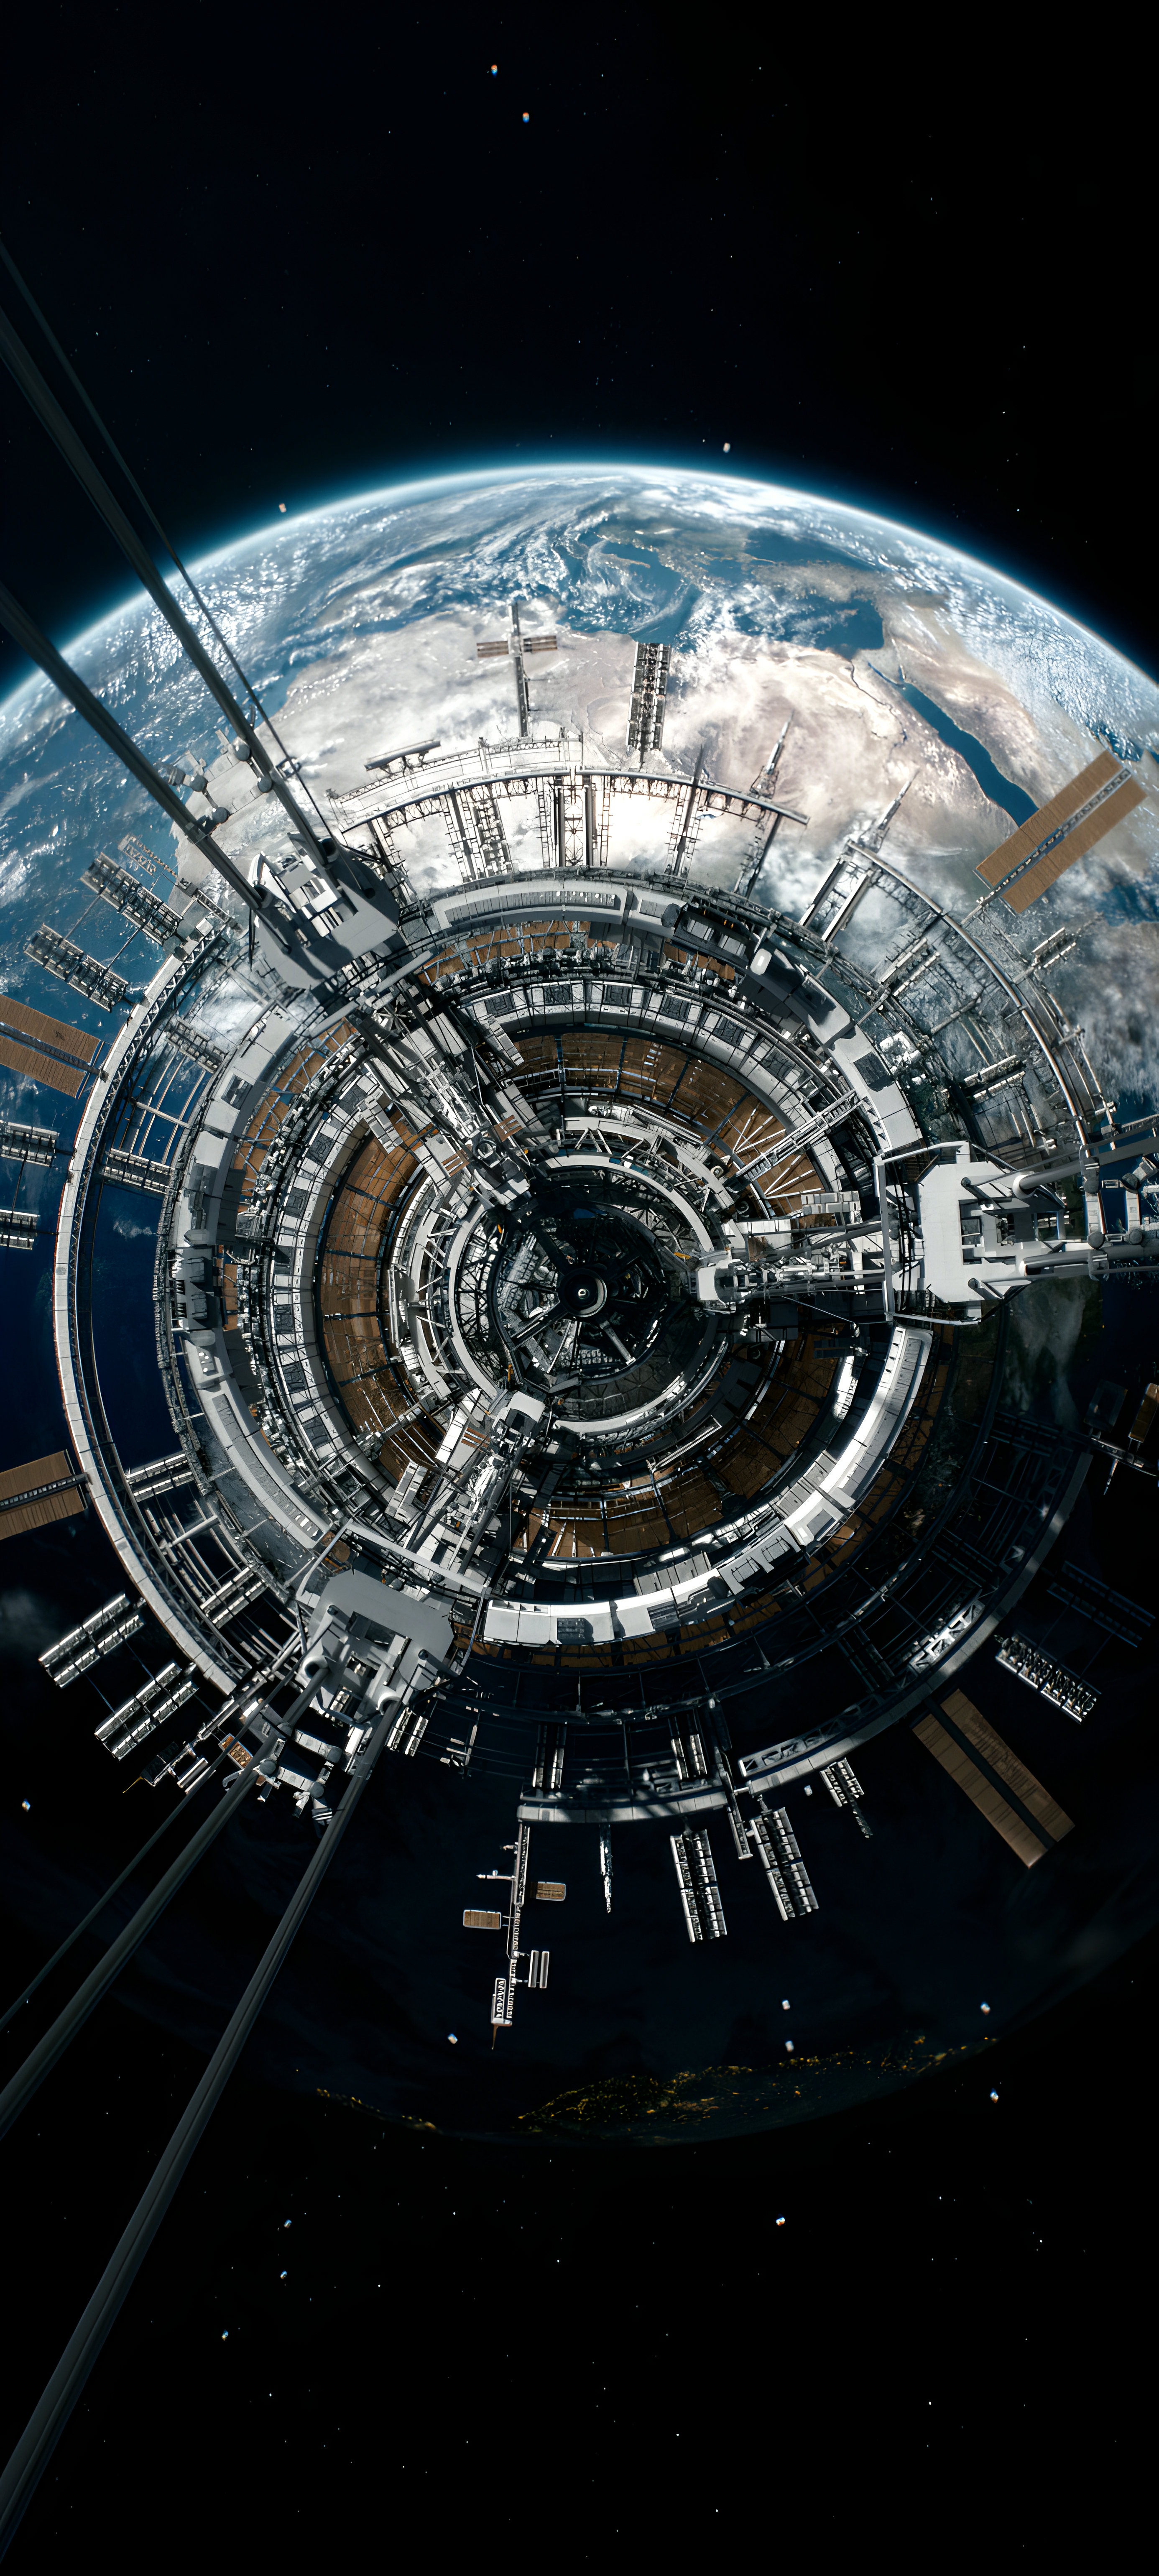 The Wandering Earth 2 Science Fiction Film Stills Portrait Display Technology Space 2772x6160